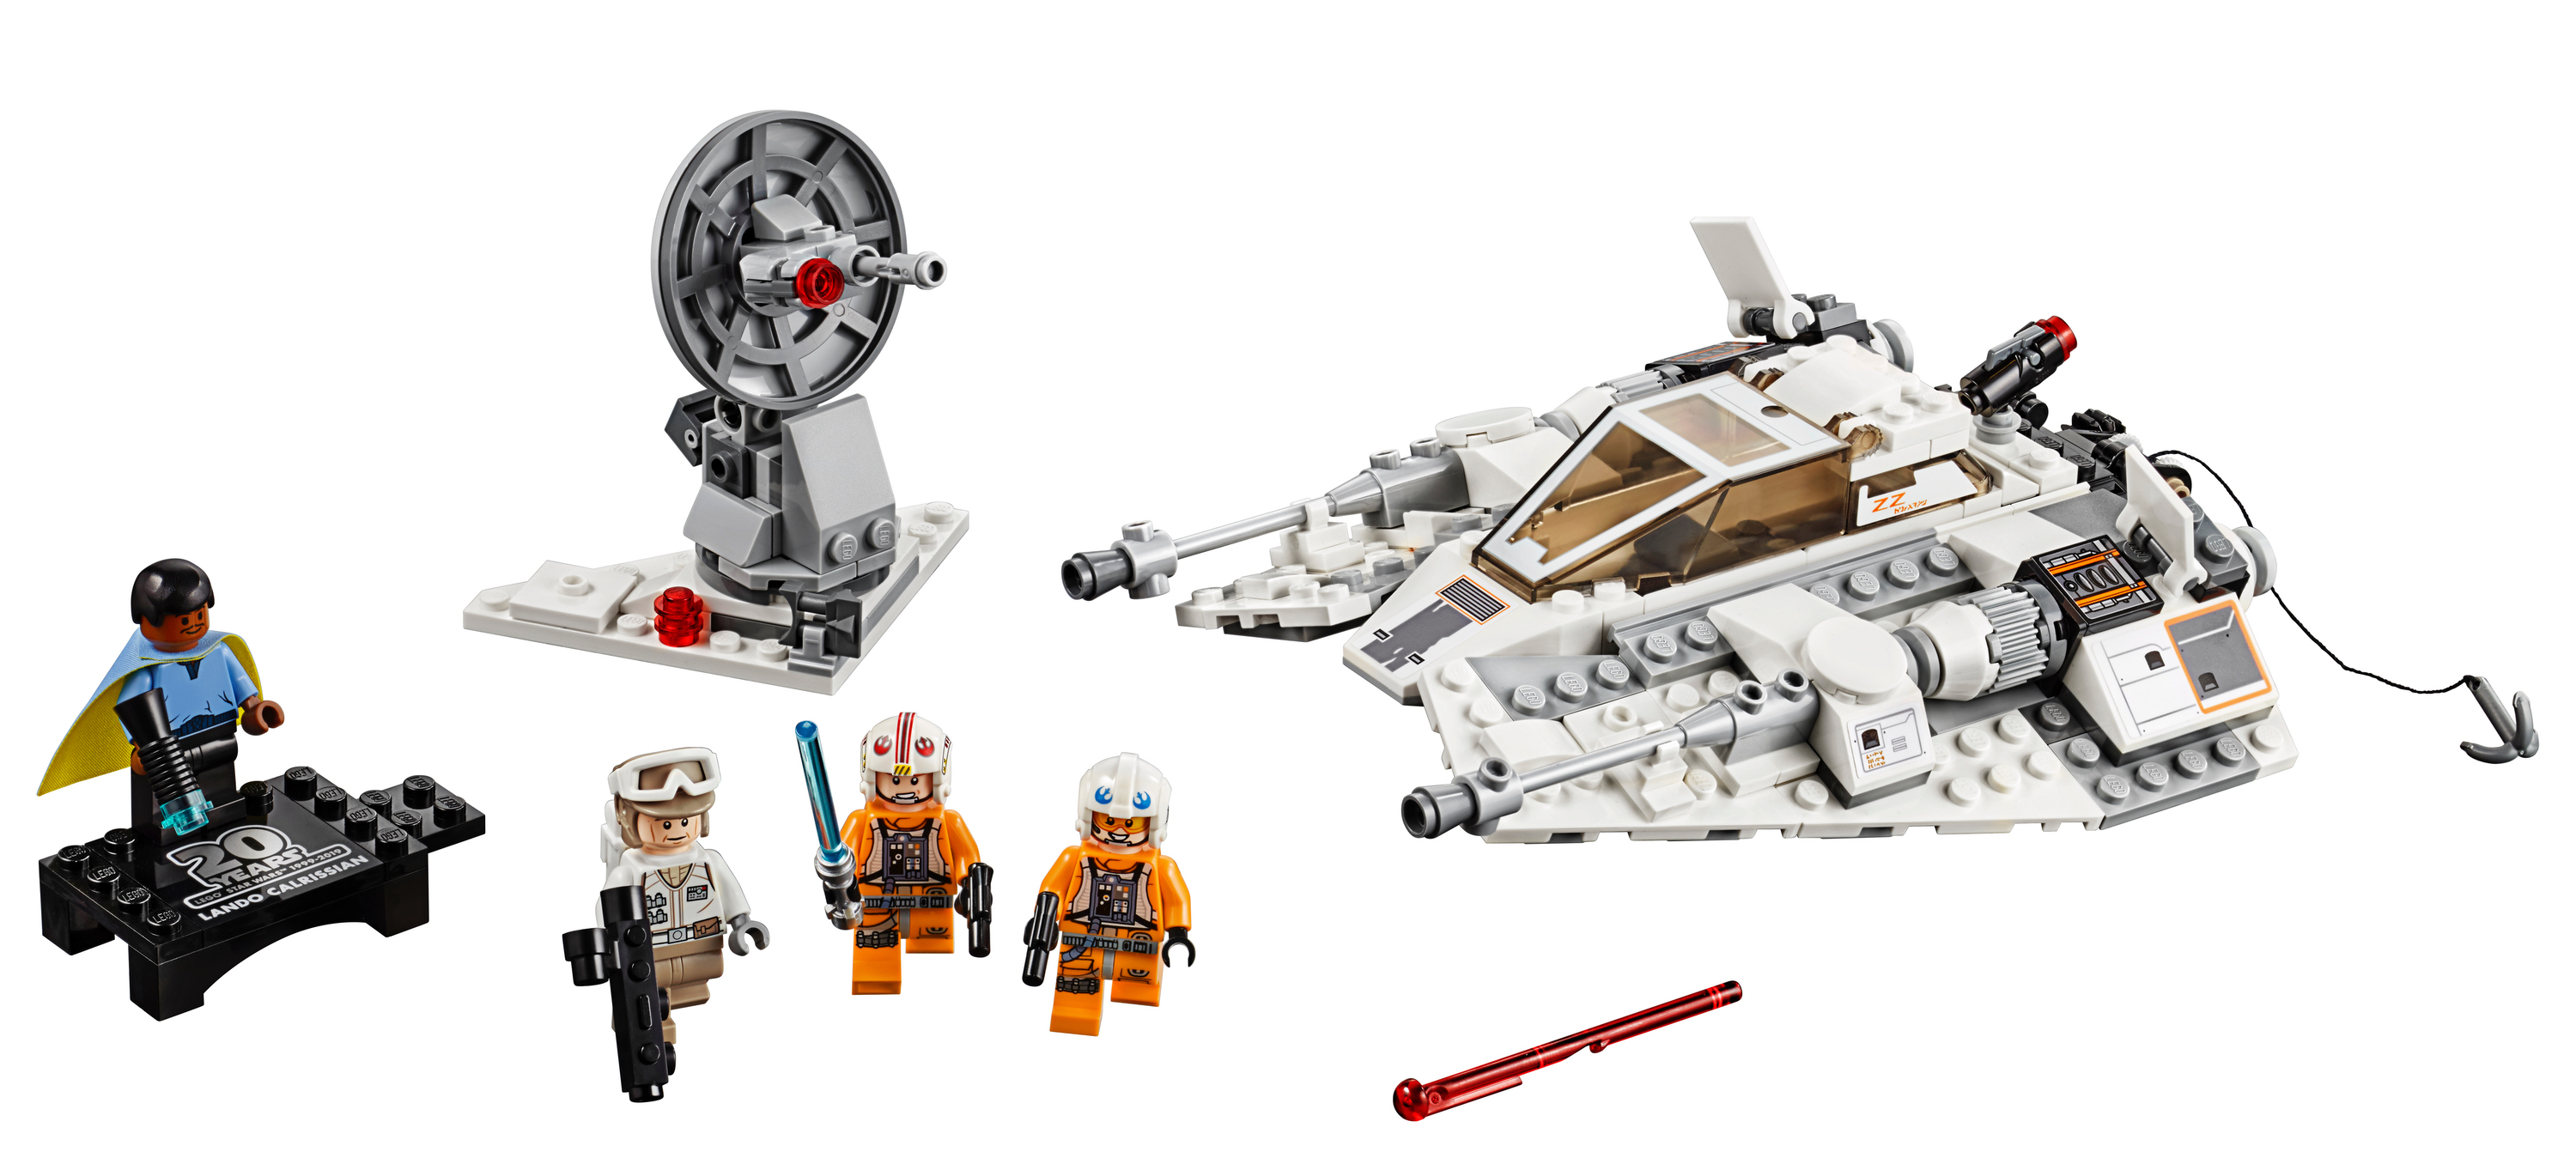 new lego star wars sets 2019 release dates